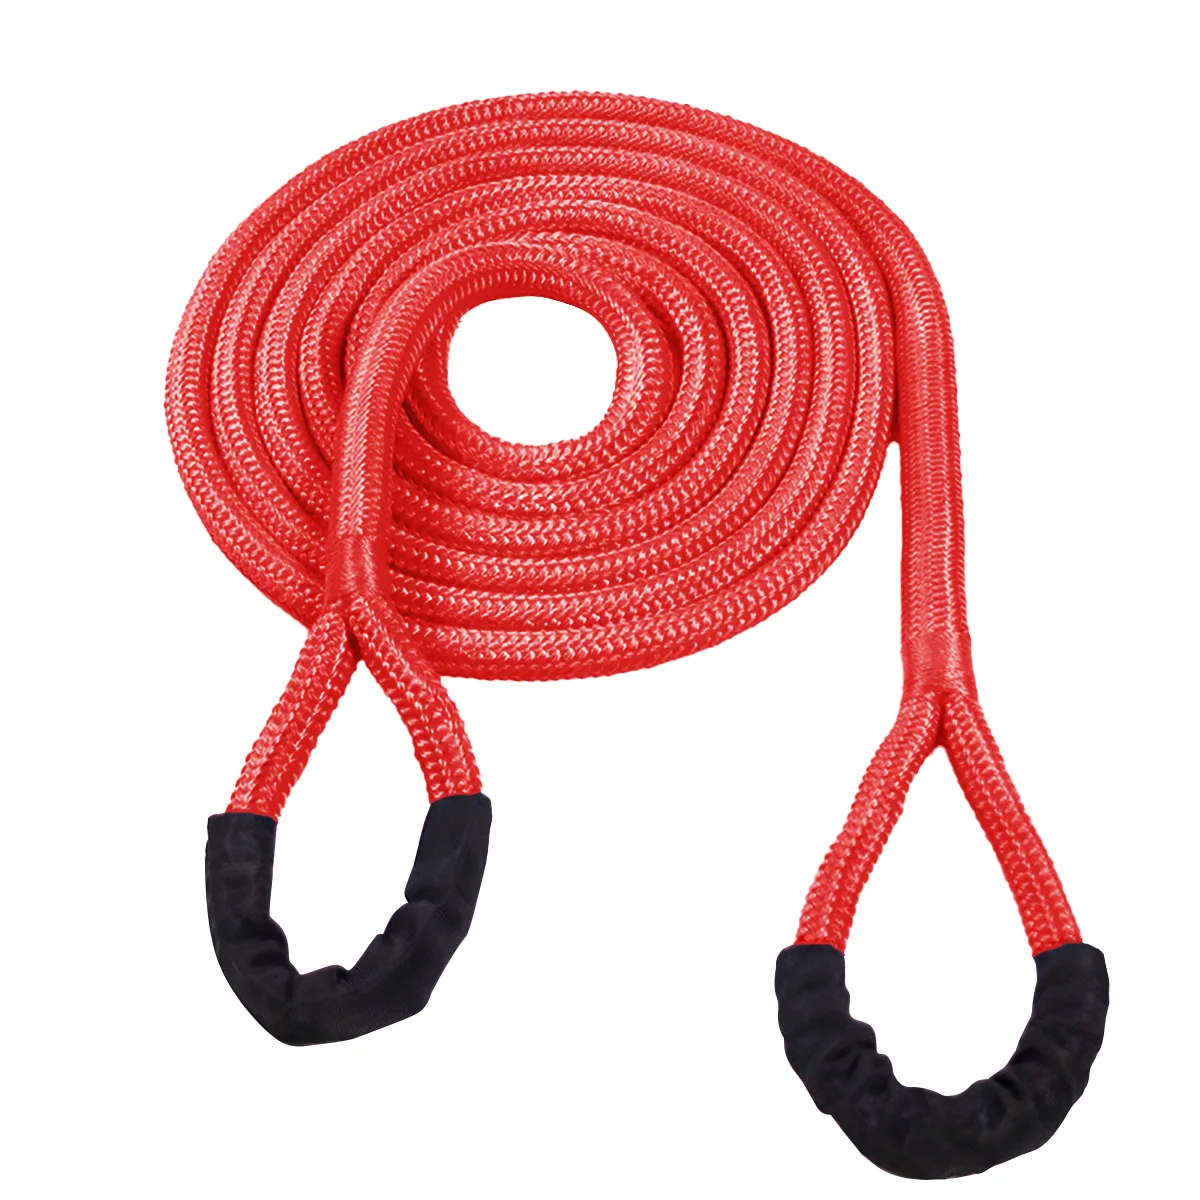 https://ae01.alicdn.com/kf/Sad78b910900842238ed11e146400ef13U/Off-Road-auto-Red-black-blue-Color-Nylon-Recovery-Kinetic-Towing-Rope-1-inch-with-30ft.jpg